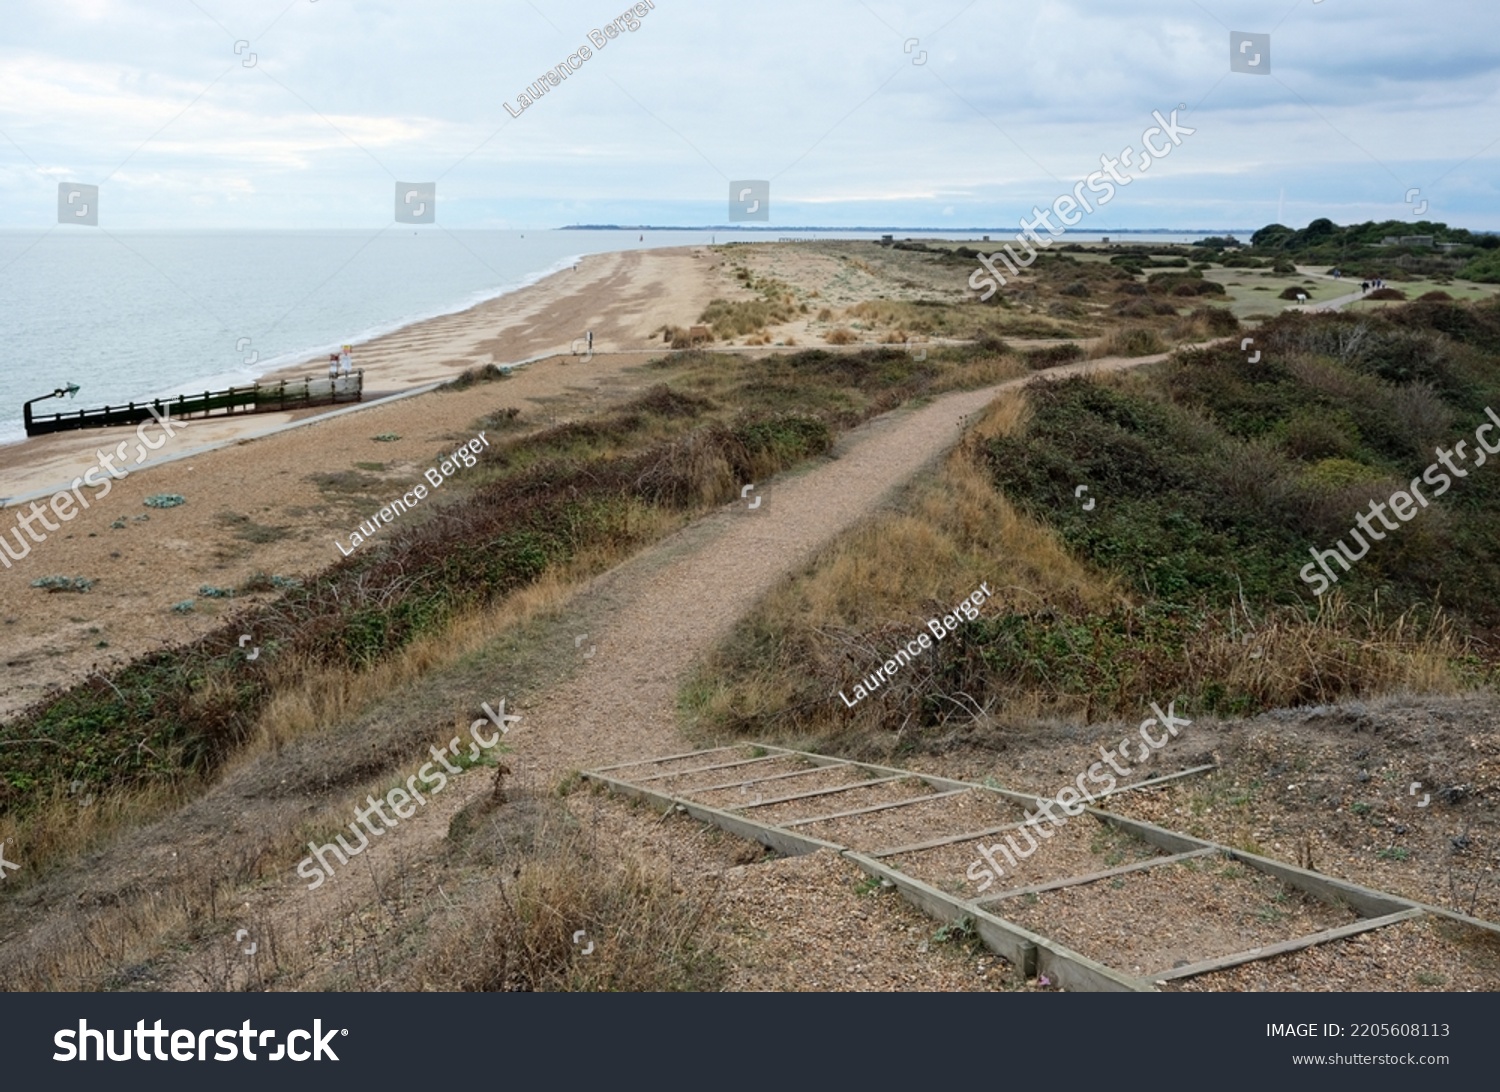 Languard Point nature reserve or natural parkland. Overcast day outdoors. Felixstowe, Suffolk, United Kingdom, September 21, 2022 #2205608113